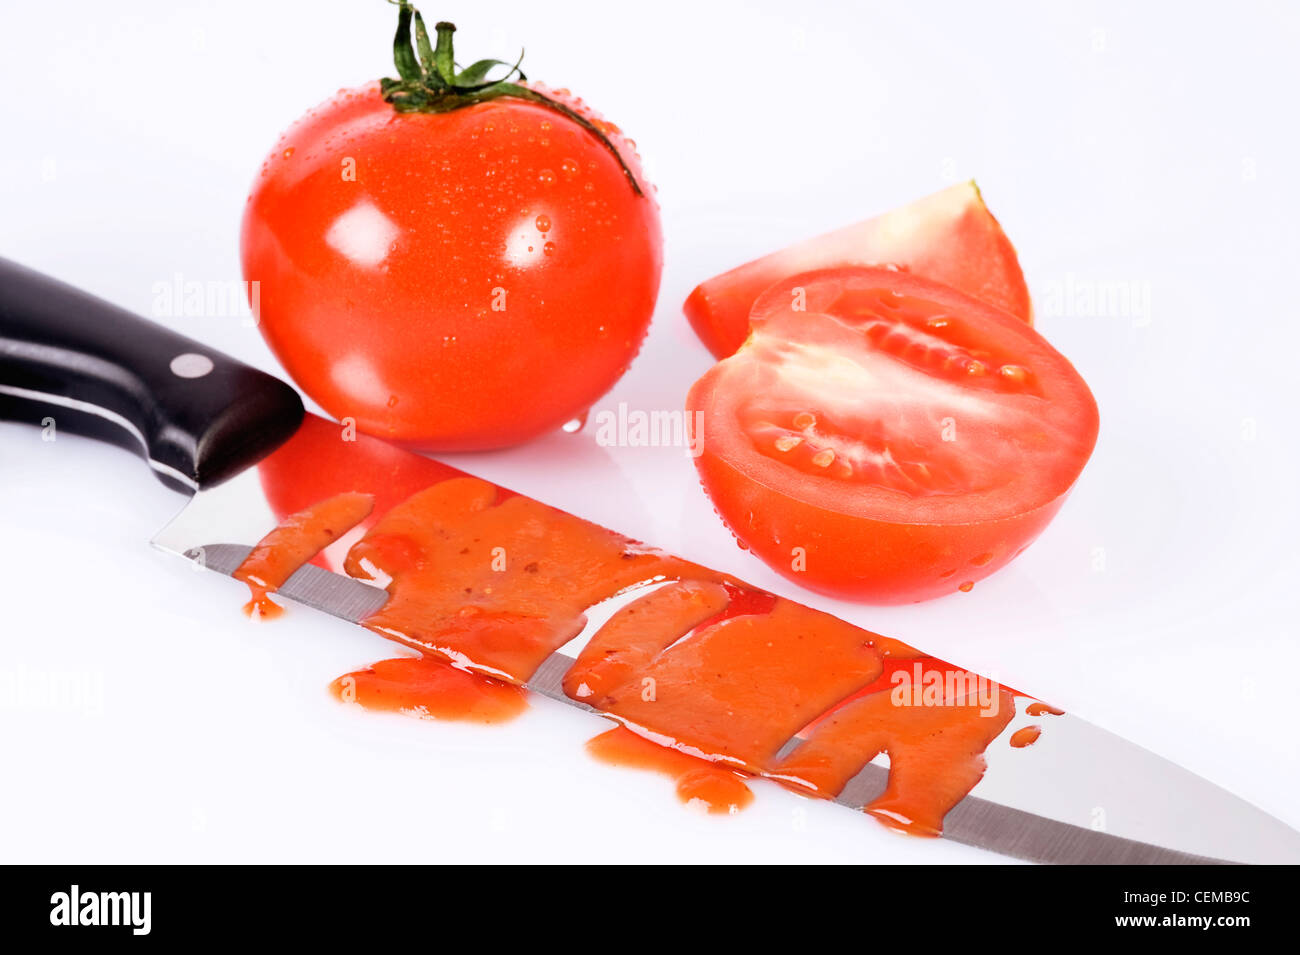 tomatoes and knife stained with ketchup over white Stock Photo